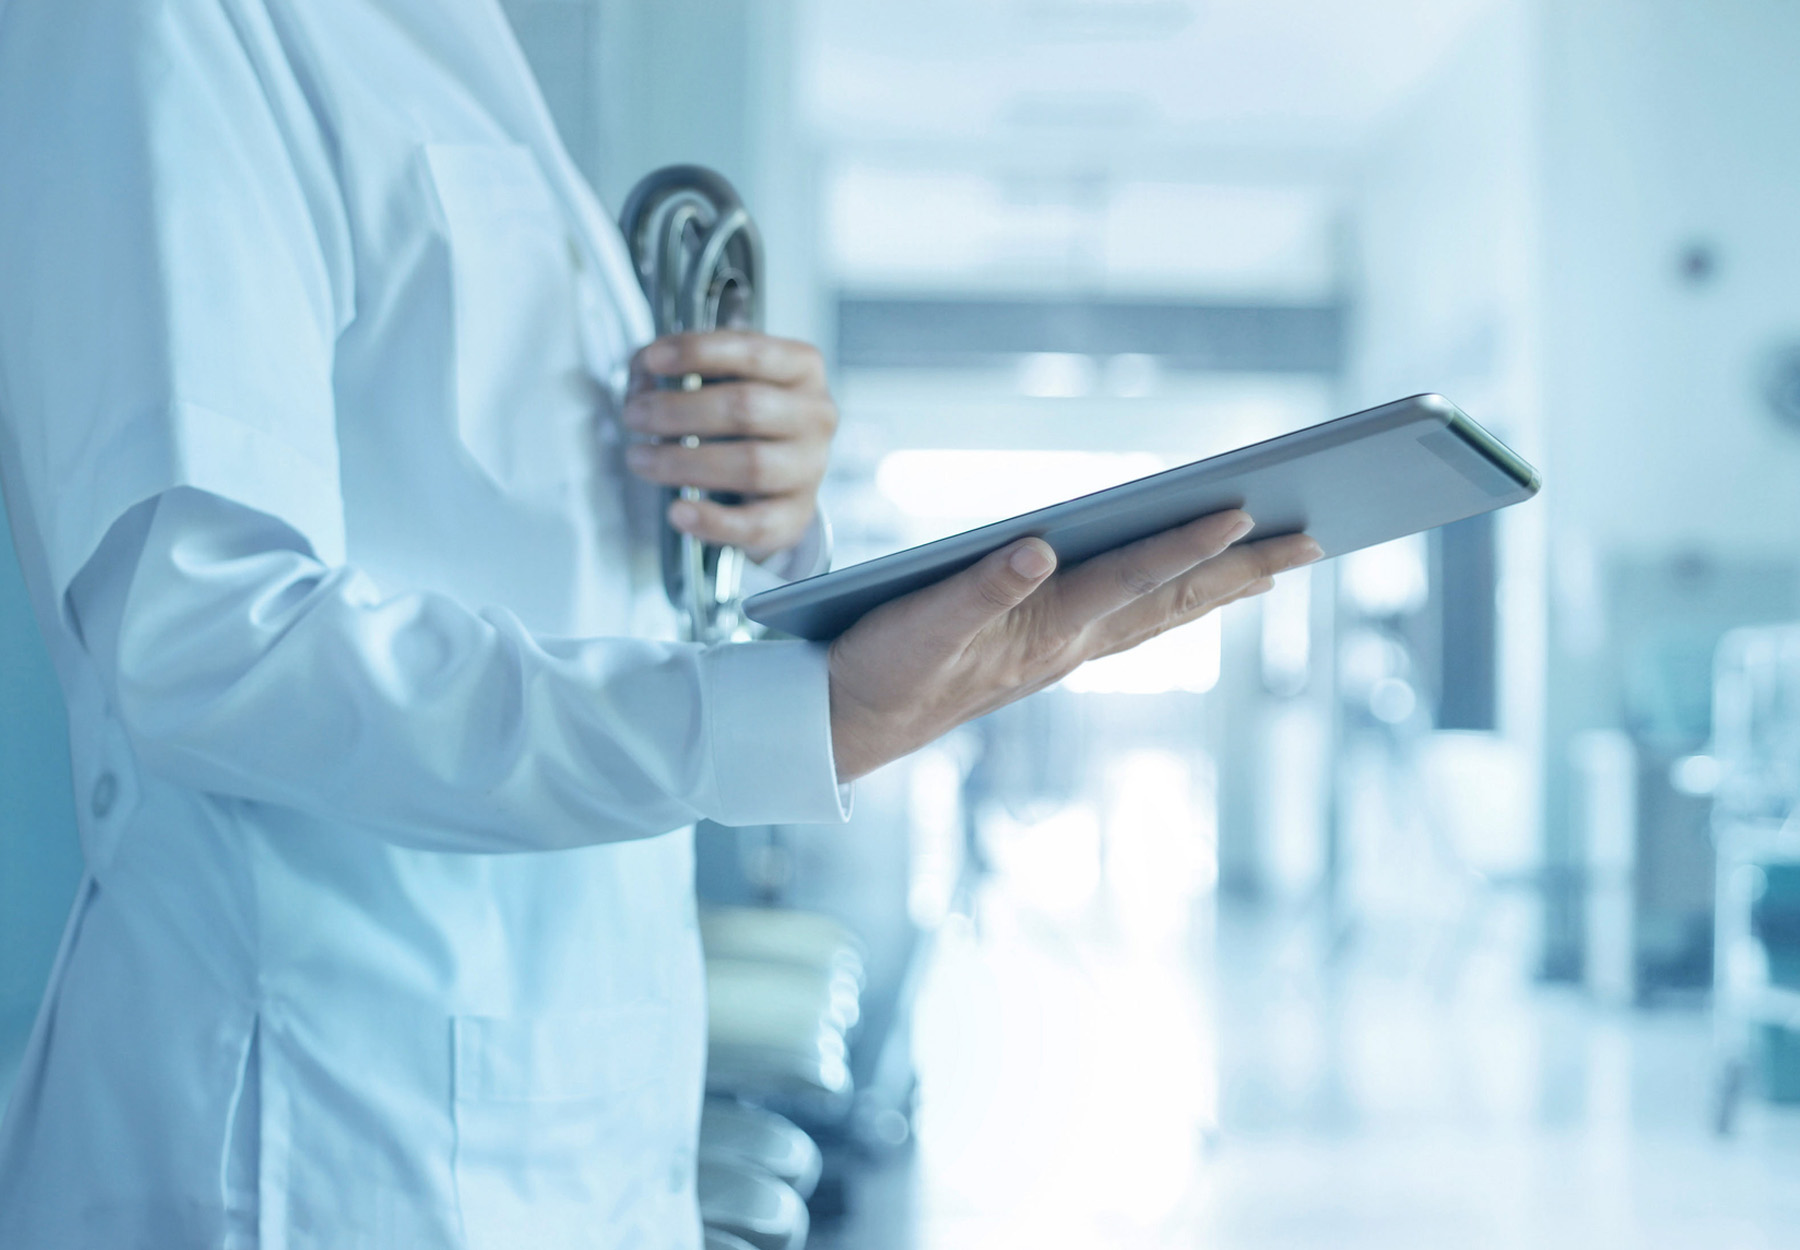 A closeup of a healthcare professional in a white coat holding a tablet and stethoscope. The image has blue tones. Stock photo.